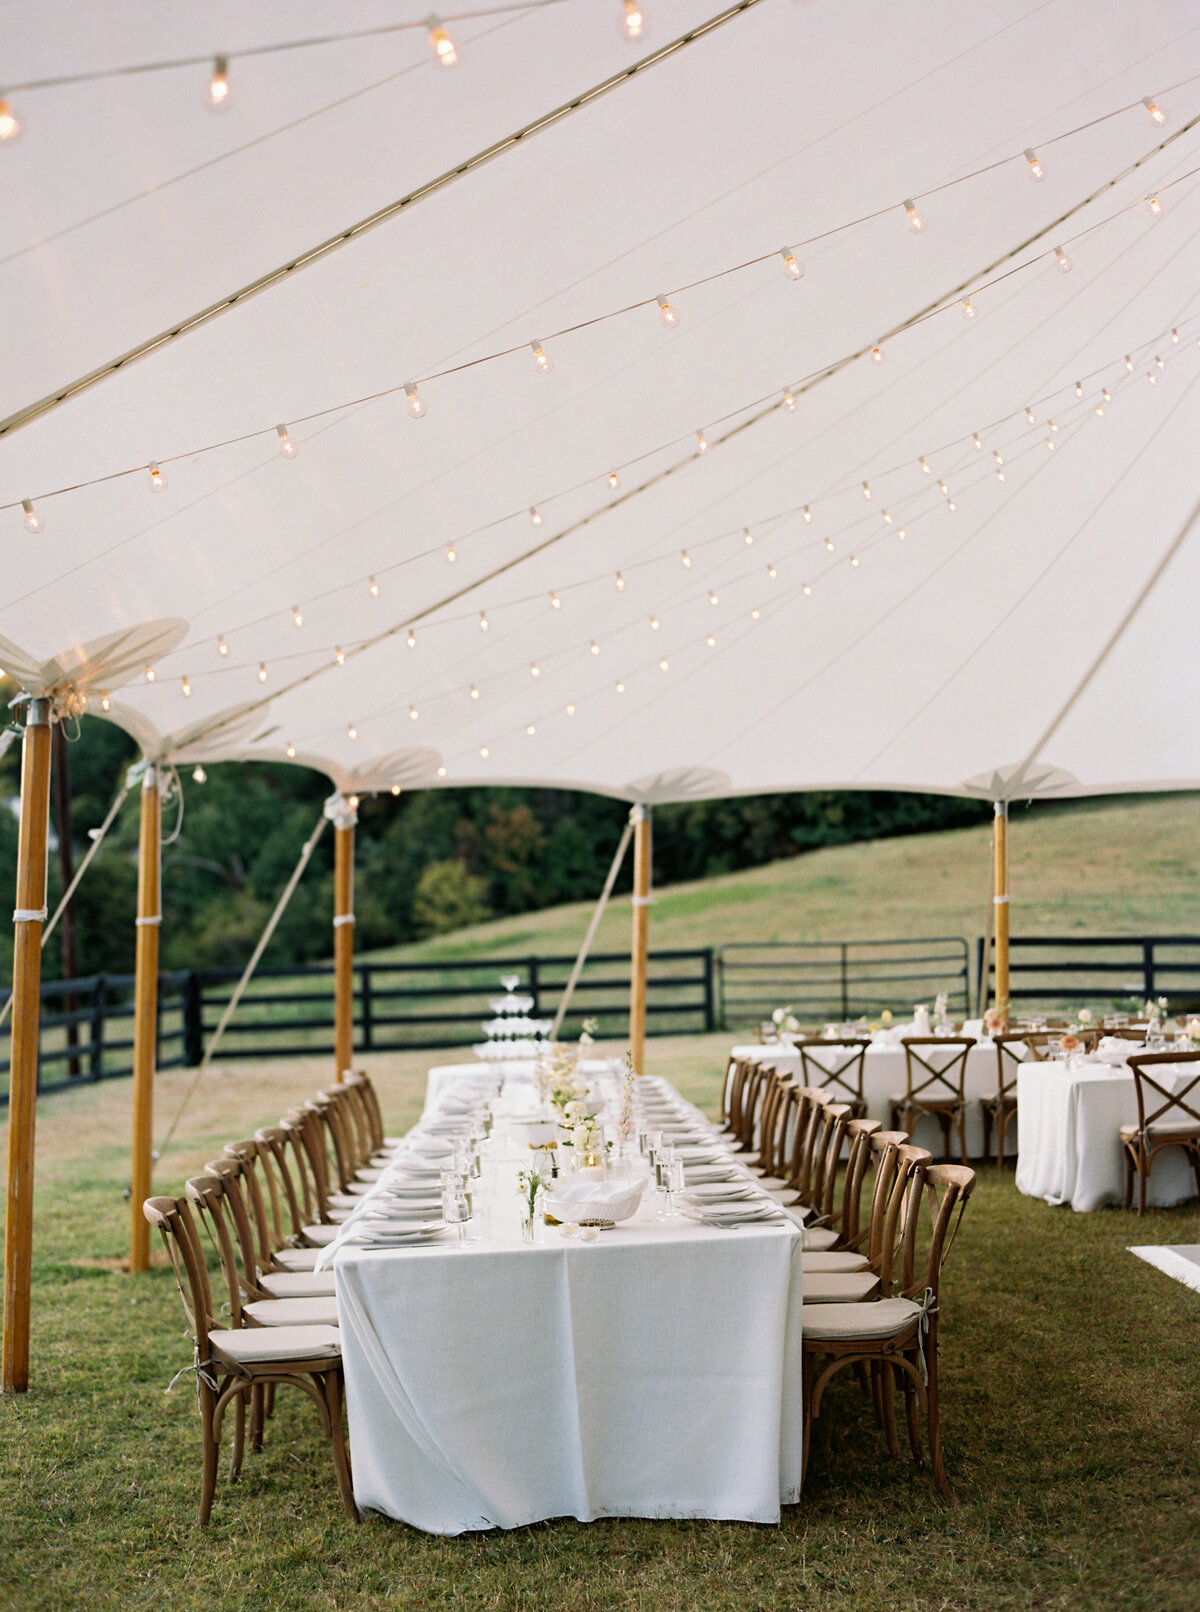 Bloomsbury-Farm-Ceremony-Sperry-Tent-Reception-Cross-back-chair-white-linen